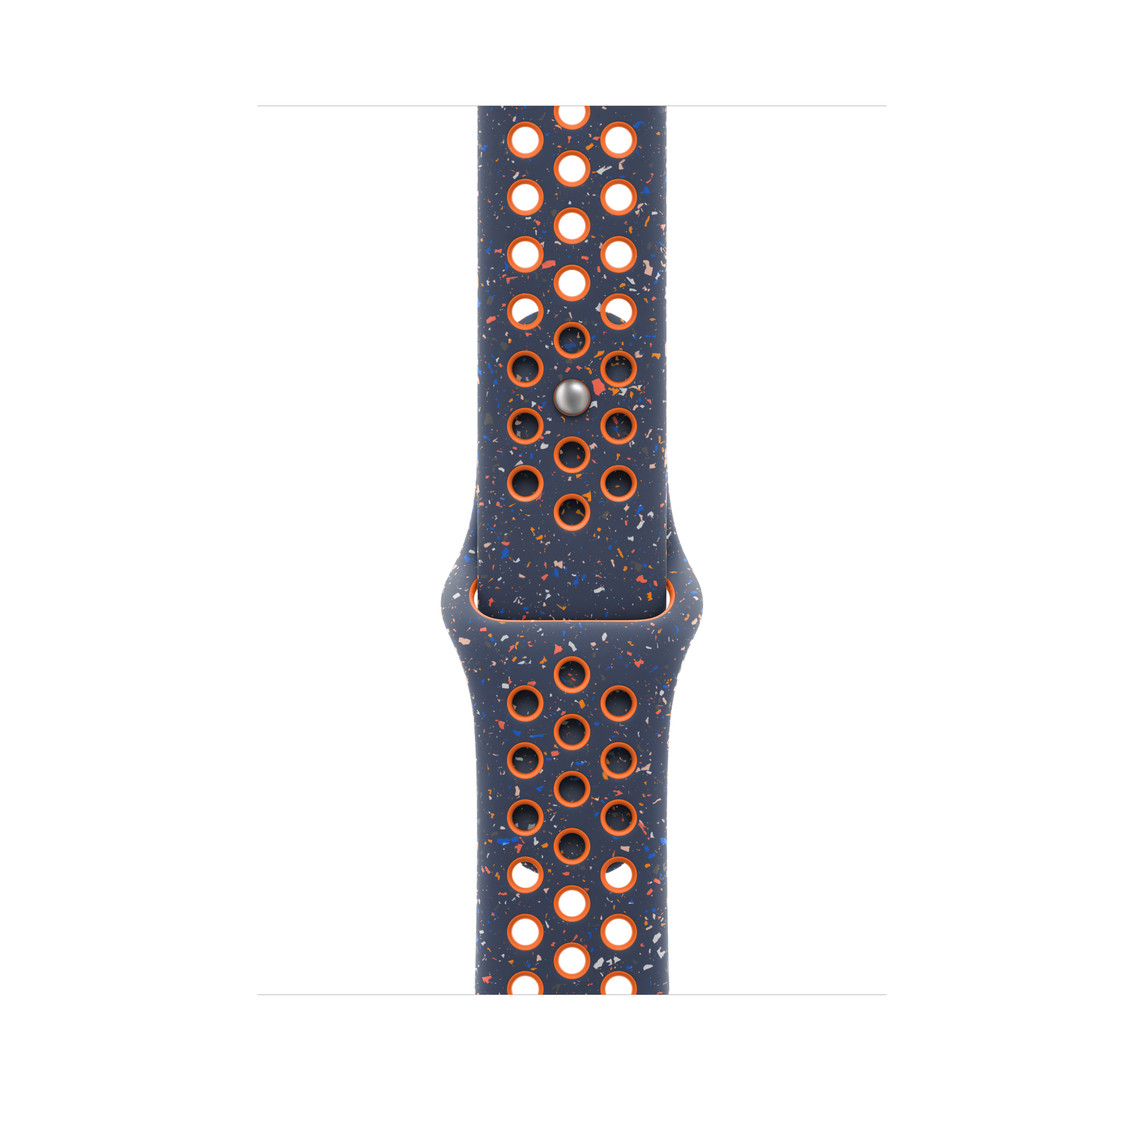 Blue Flame (dark blue) Nike Sport Band, smooth fluoroelastomer with perforations for breathability and pin-and-tuck closure